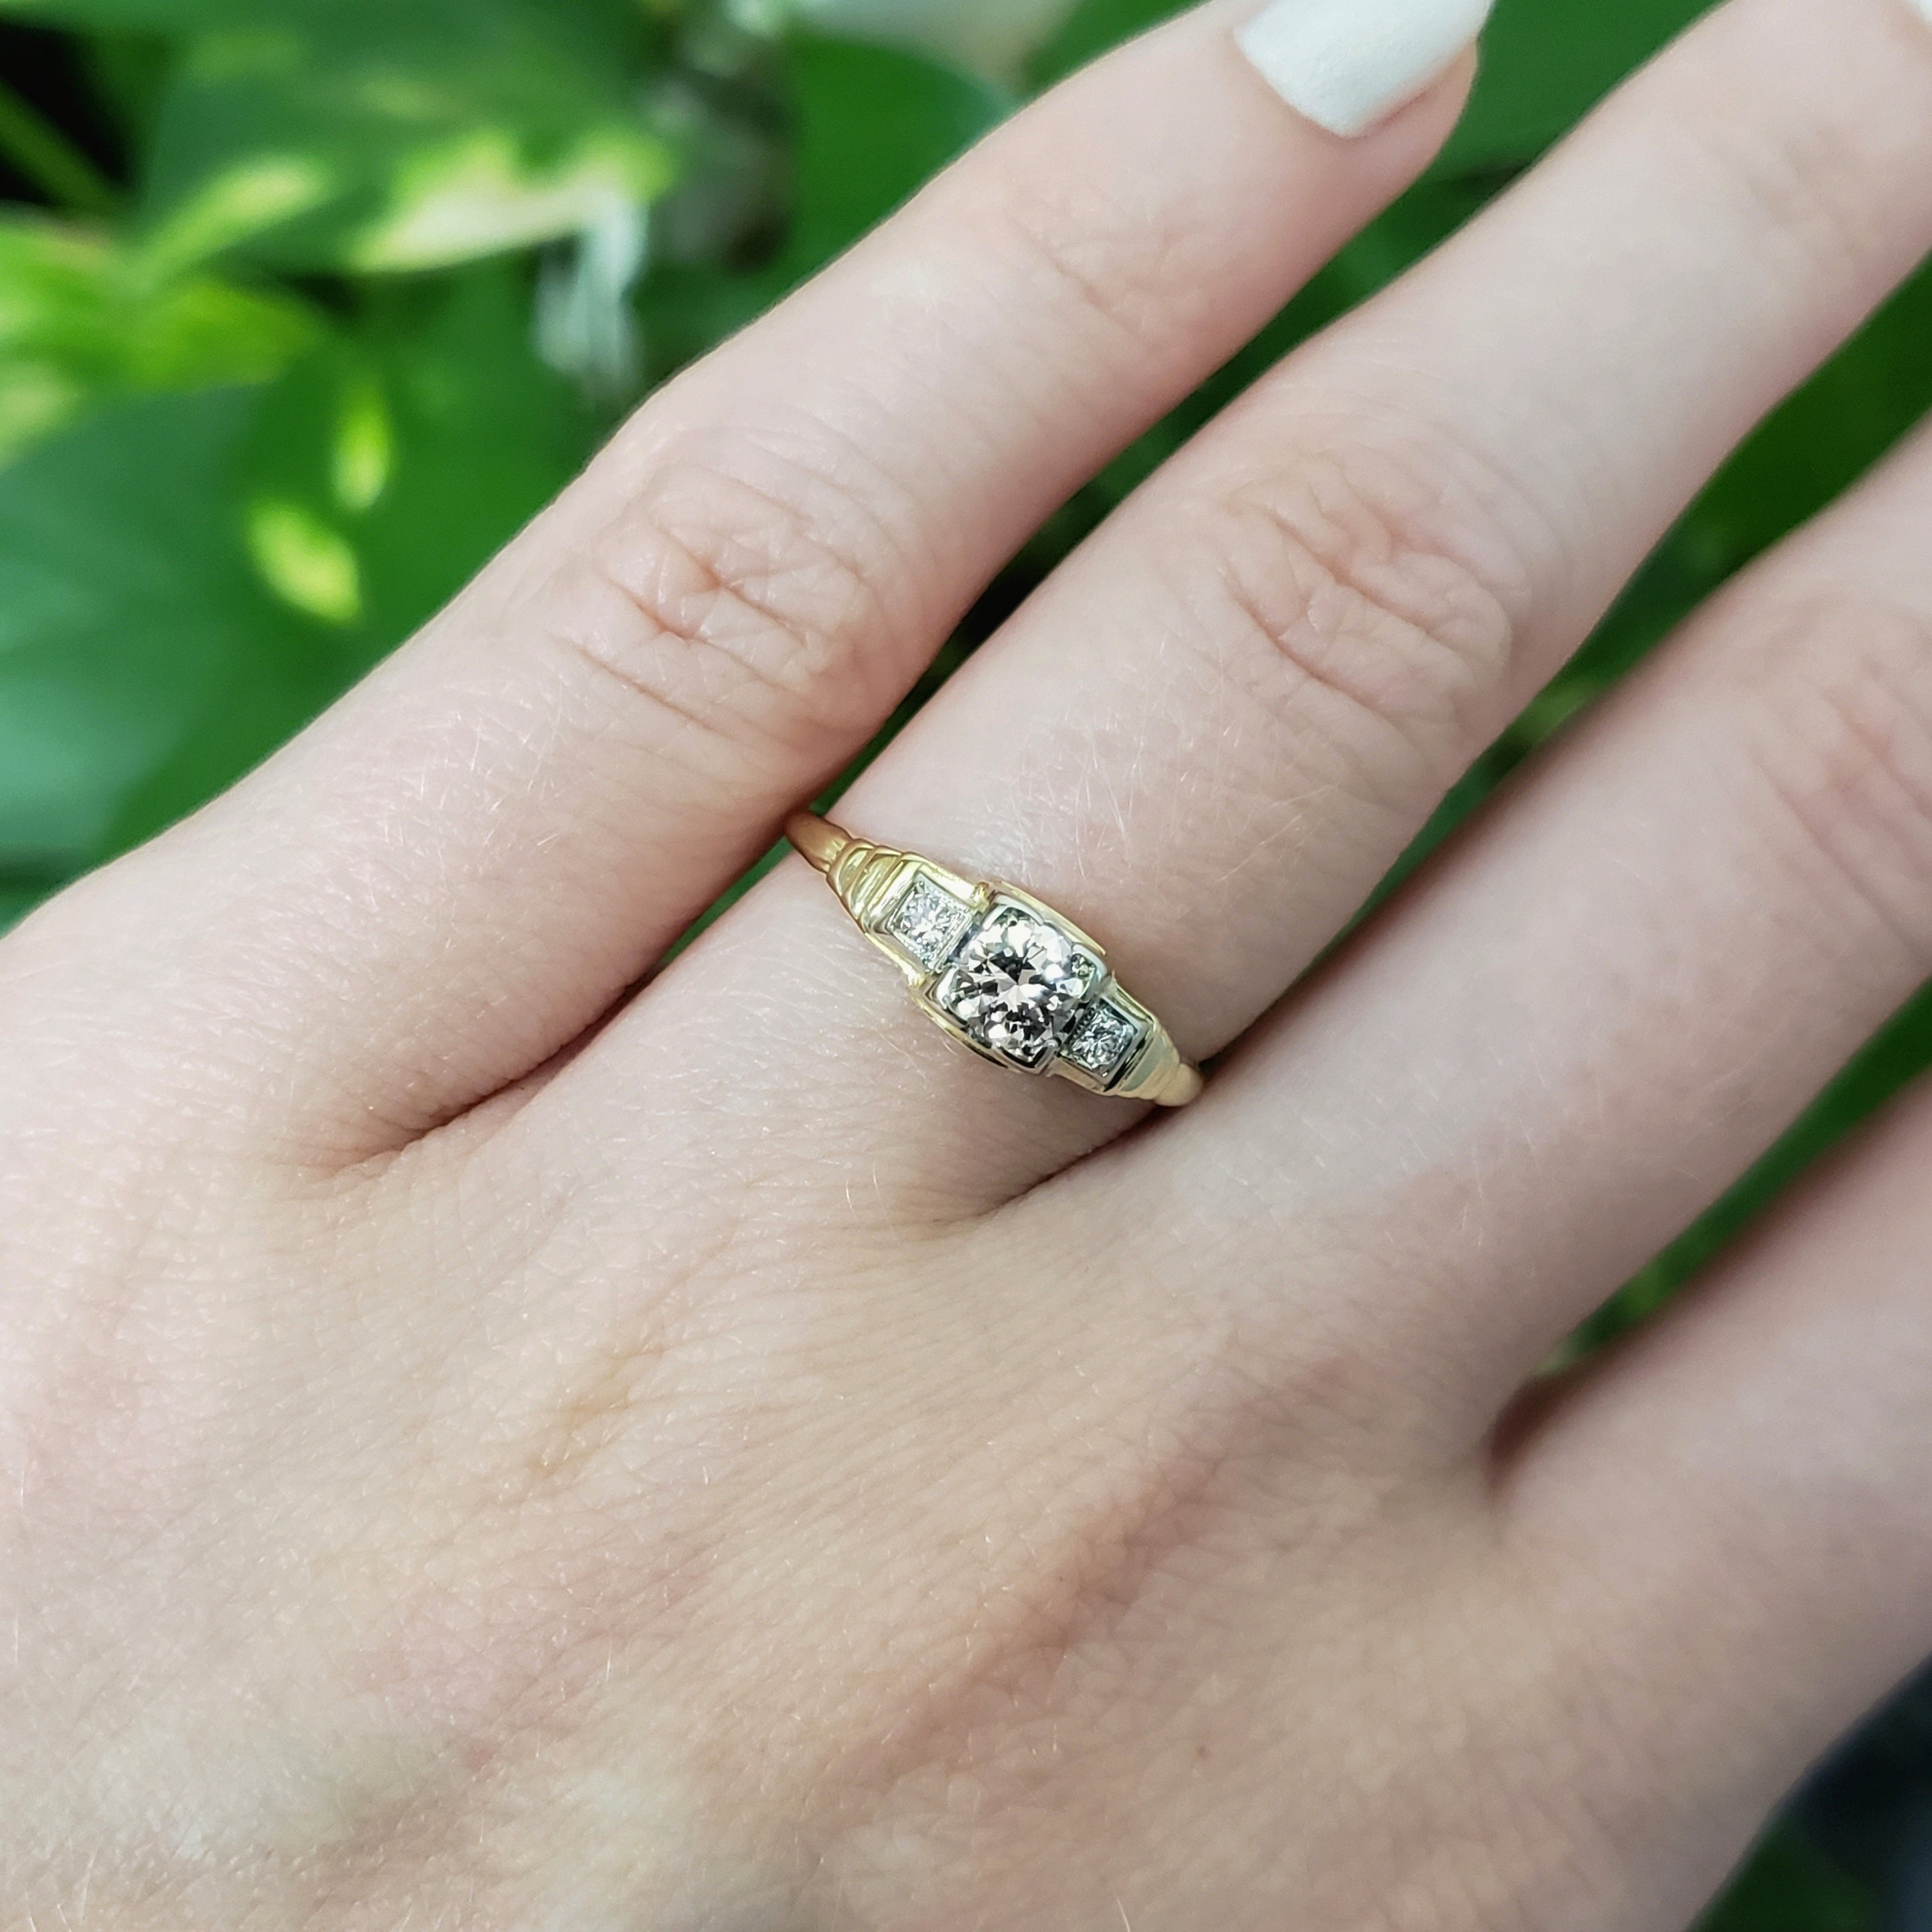 8 Vintage Engagement Rings That'll Spark Serious Joy | Victorian engagement  rings, Retro engagement rings, Antique engagement rings